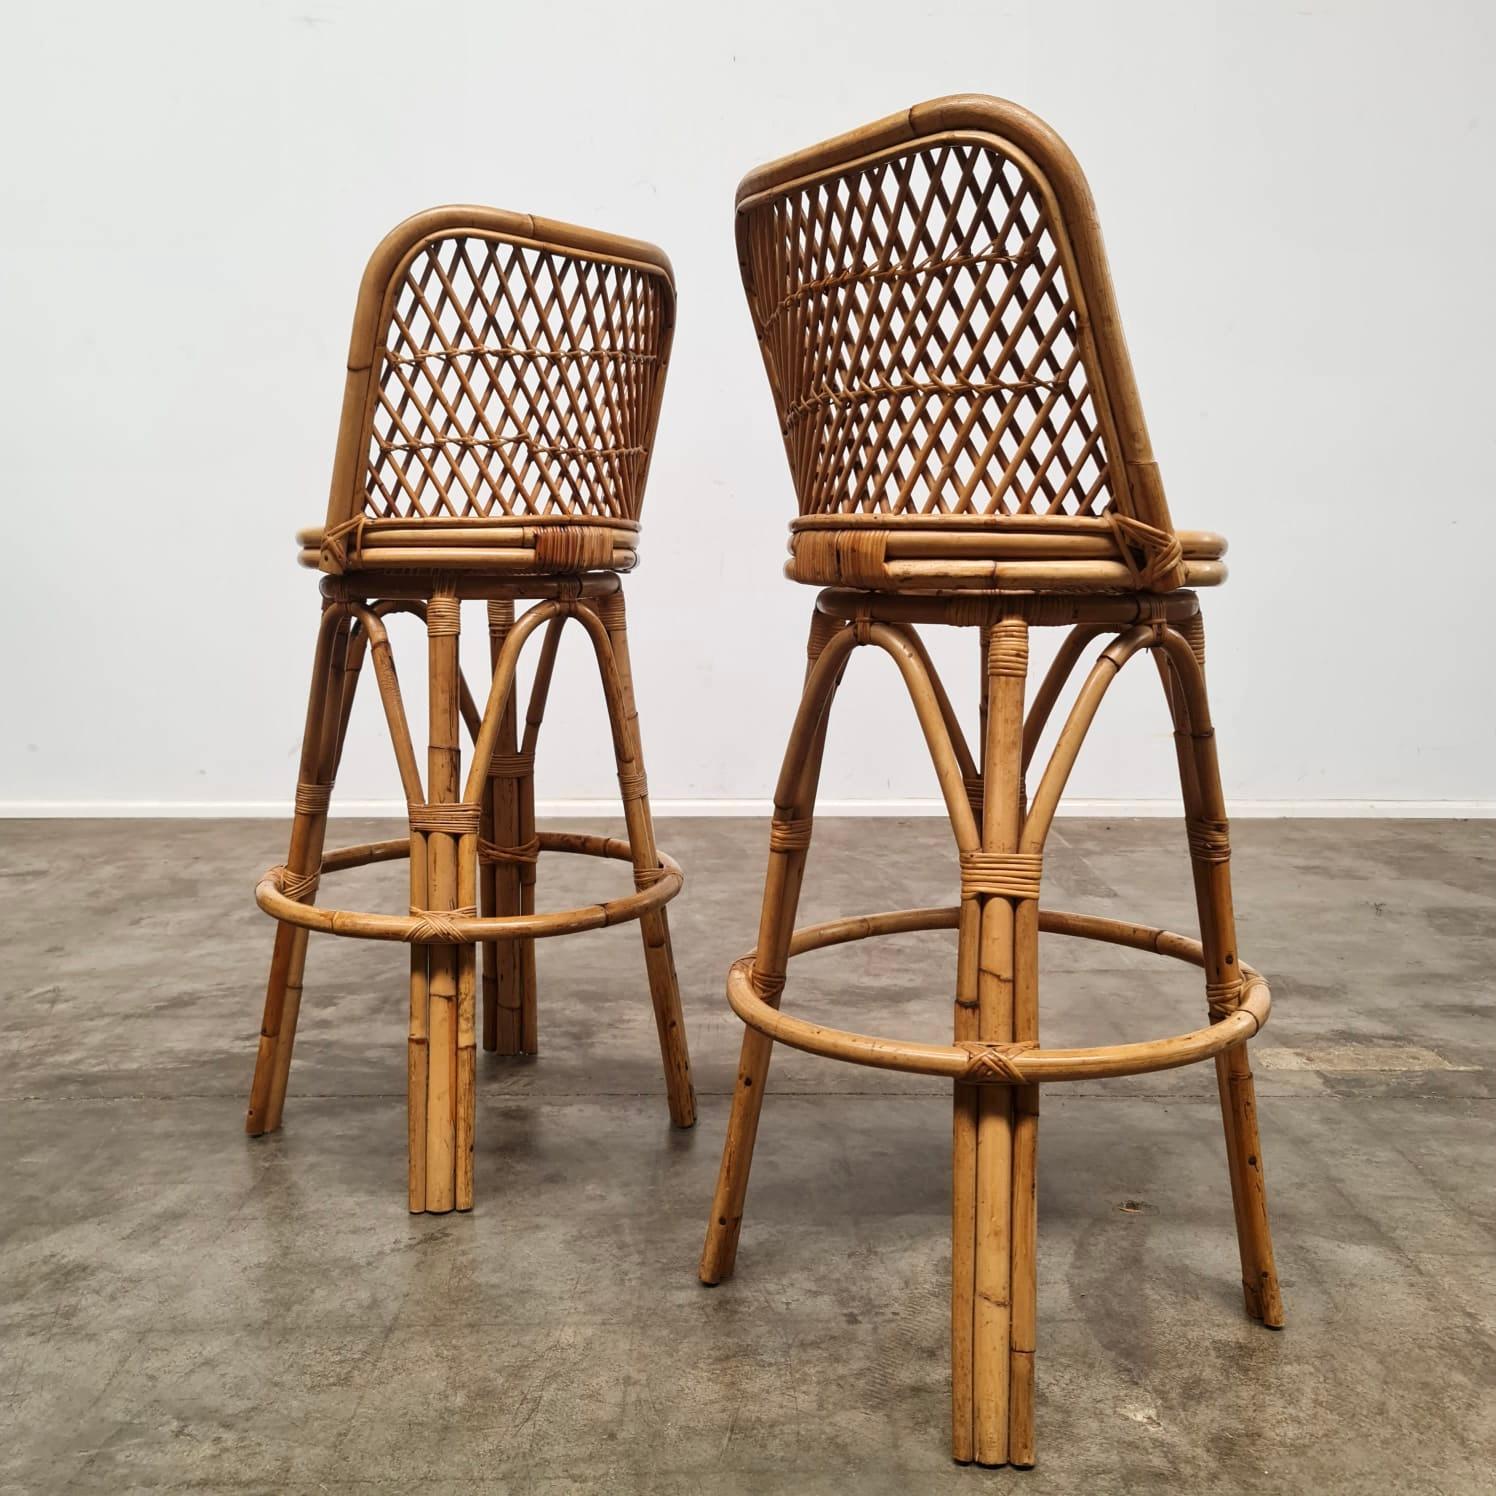 Set of two Bamboo and cane Barstools. Well crafted of bent bamboo with wrapped rattan around the joints. Displays a lovely hint of patina. Would look lovely in a beach house breakfast bar or in a tiki bar setting. These two stools have been freshly